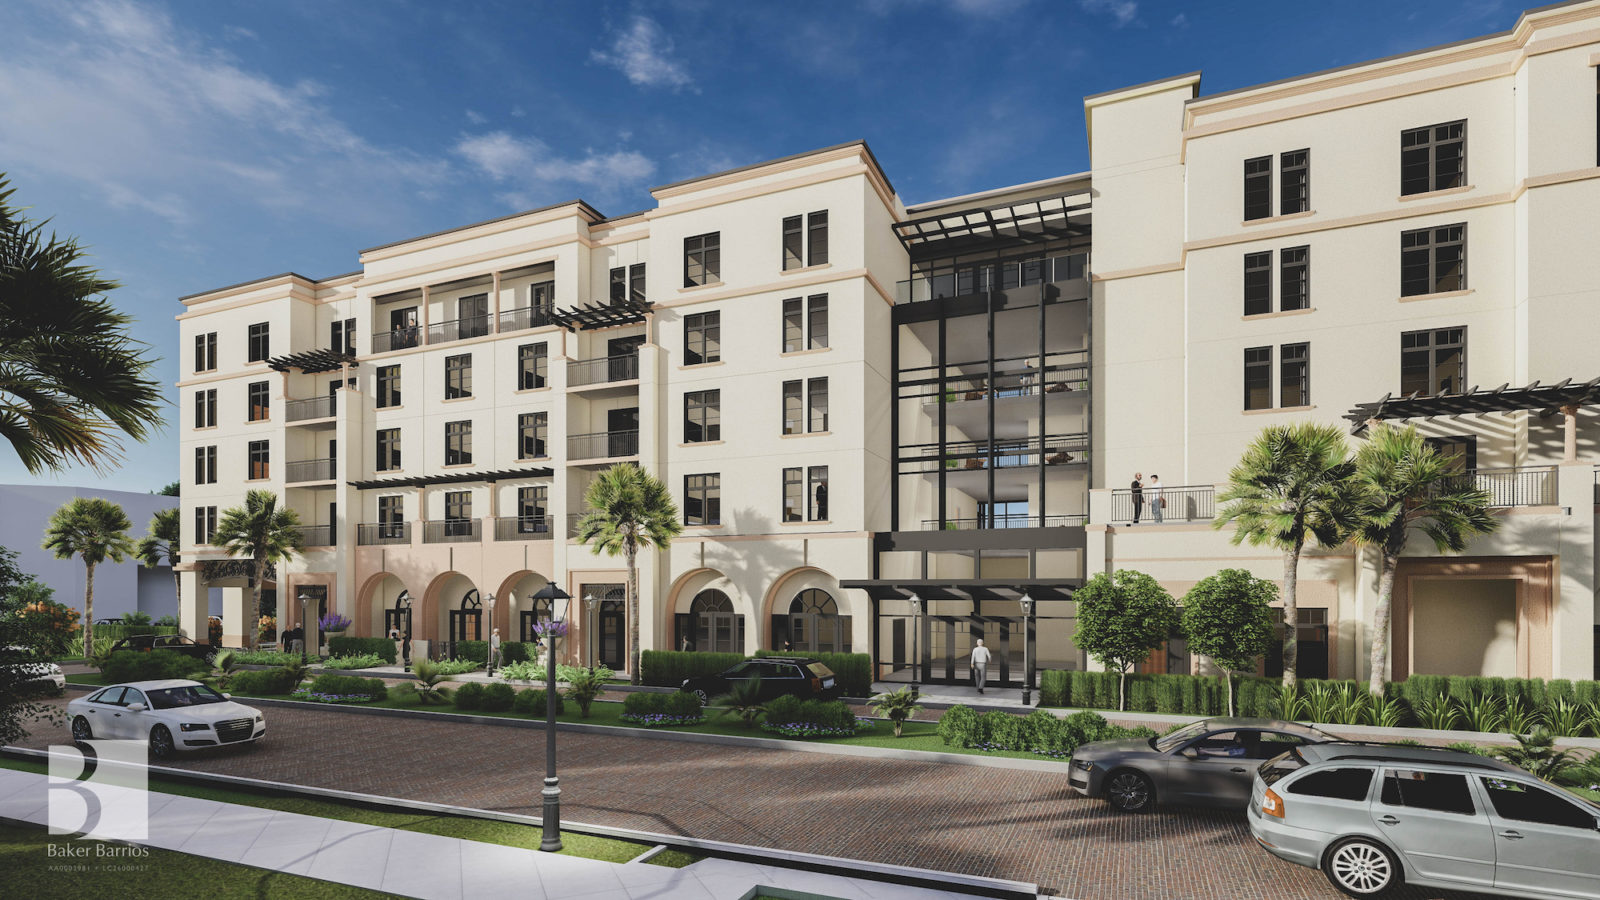 Exterior rendering of The Alfond Inn expansion